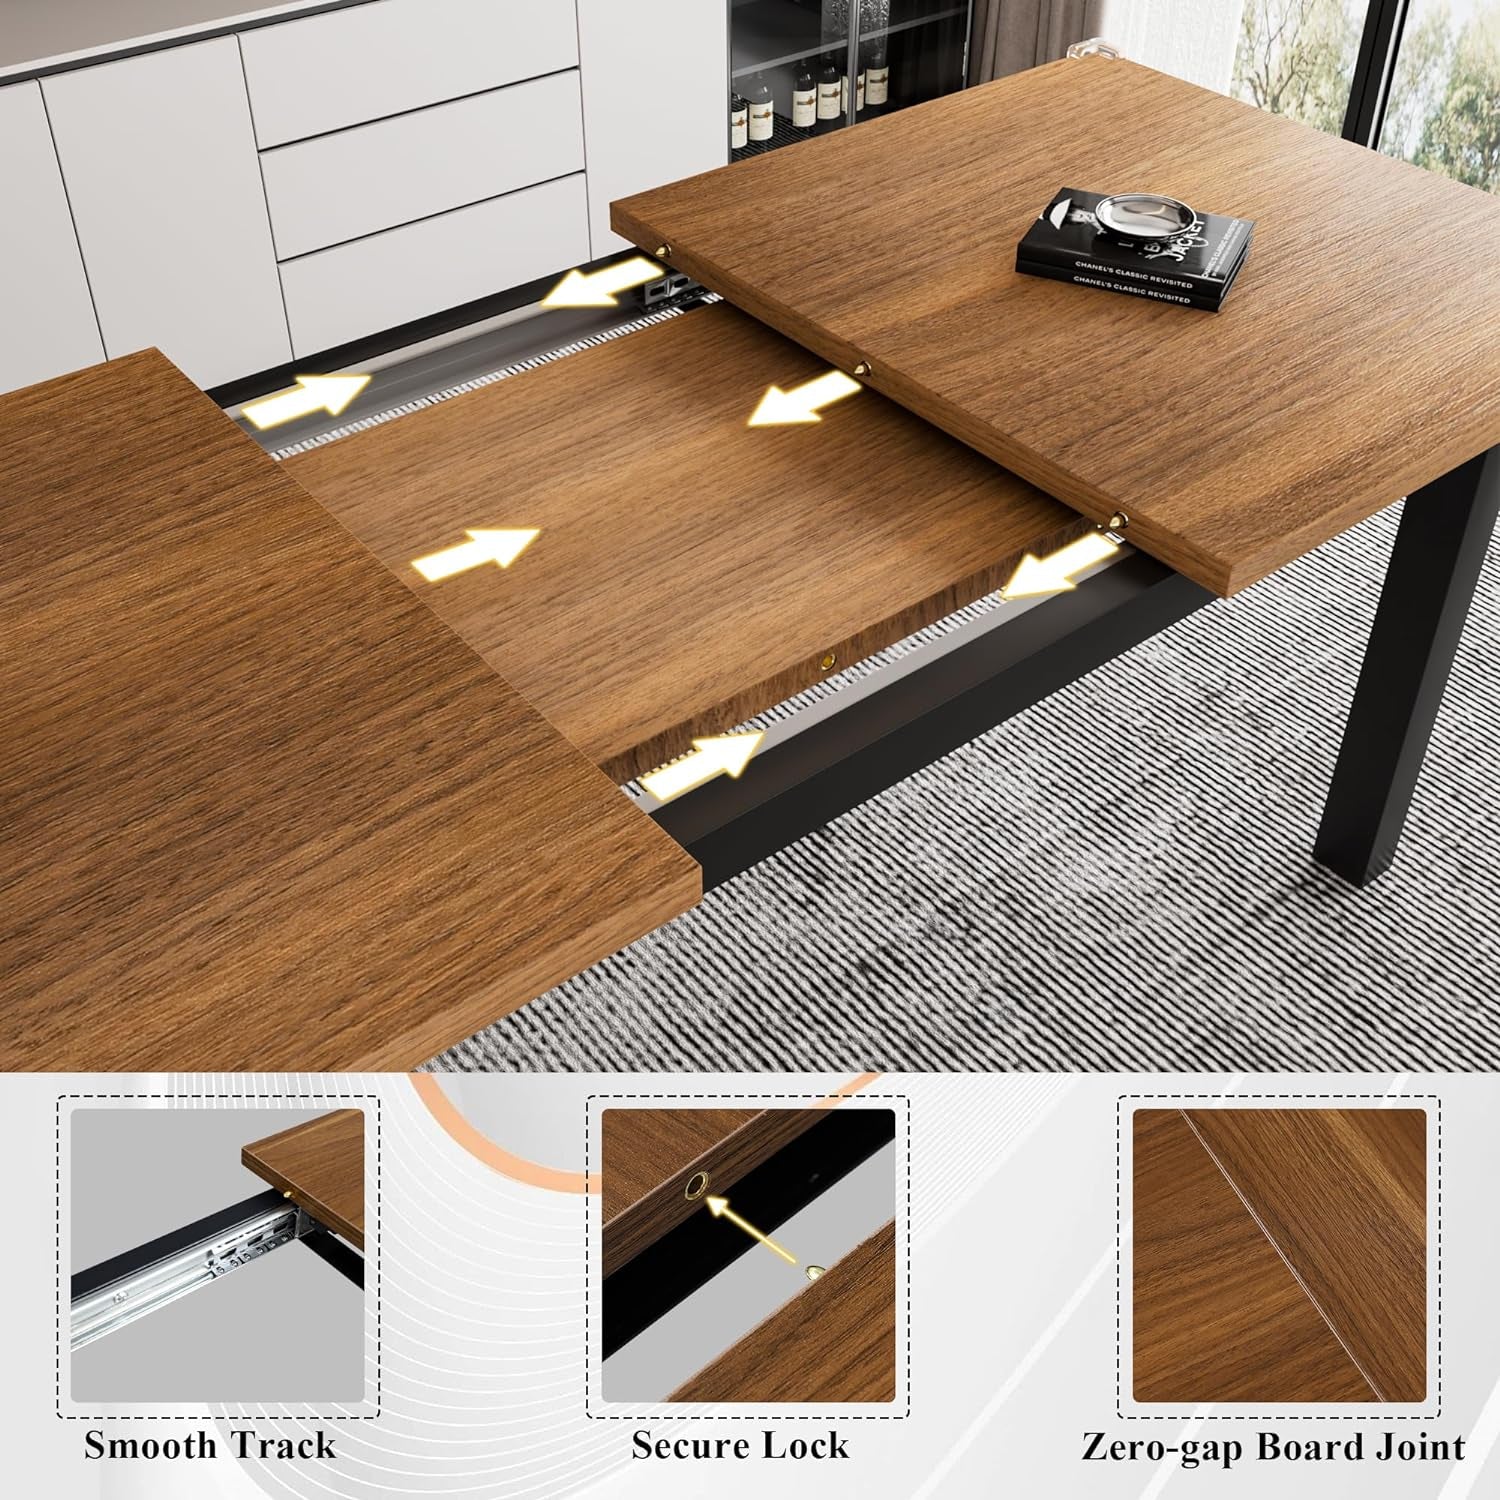 5-Piece Dining Table Set for 4-8 People, Extendable Kitchen Table Set with 2 Benches and 2 Square Stools, Mid-Century Dining Room Table with Metal Frame & MDF Board, Saving Space, Walnut